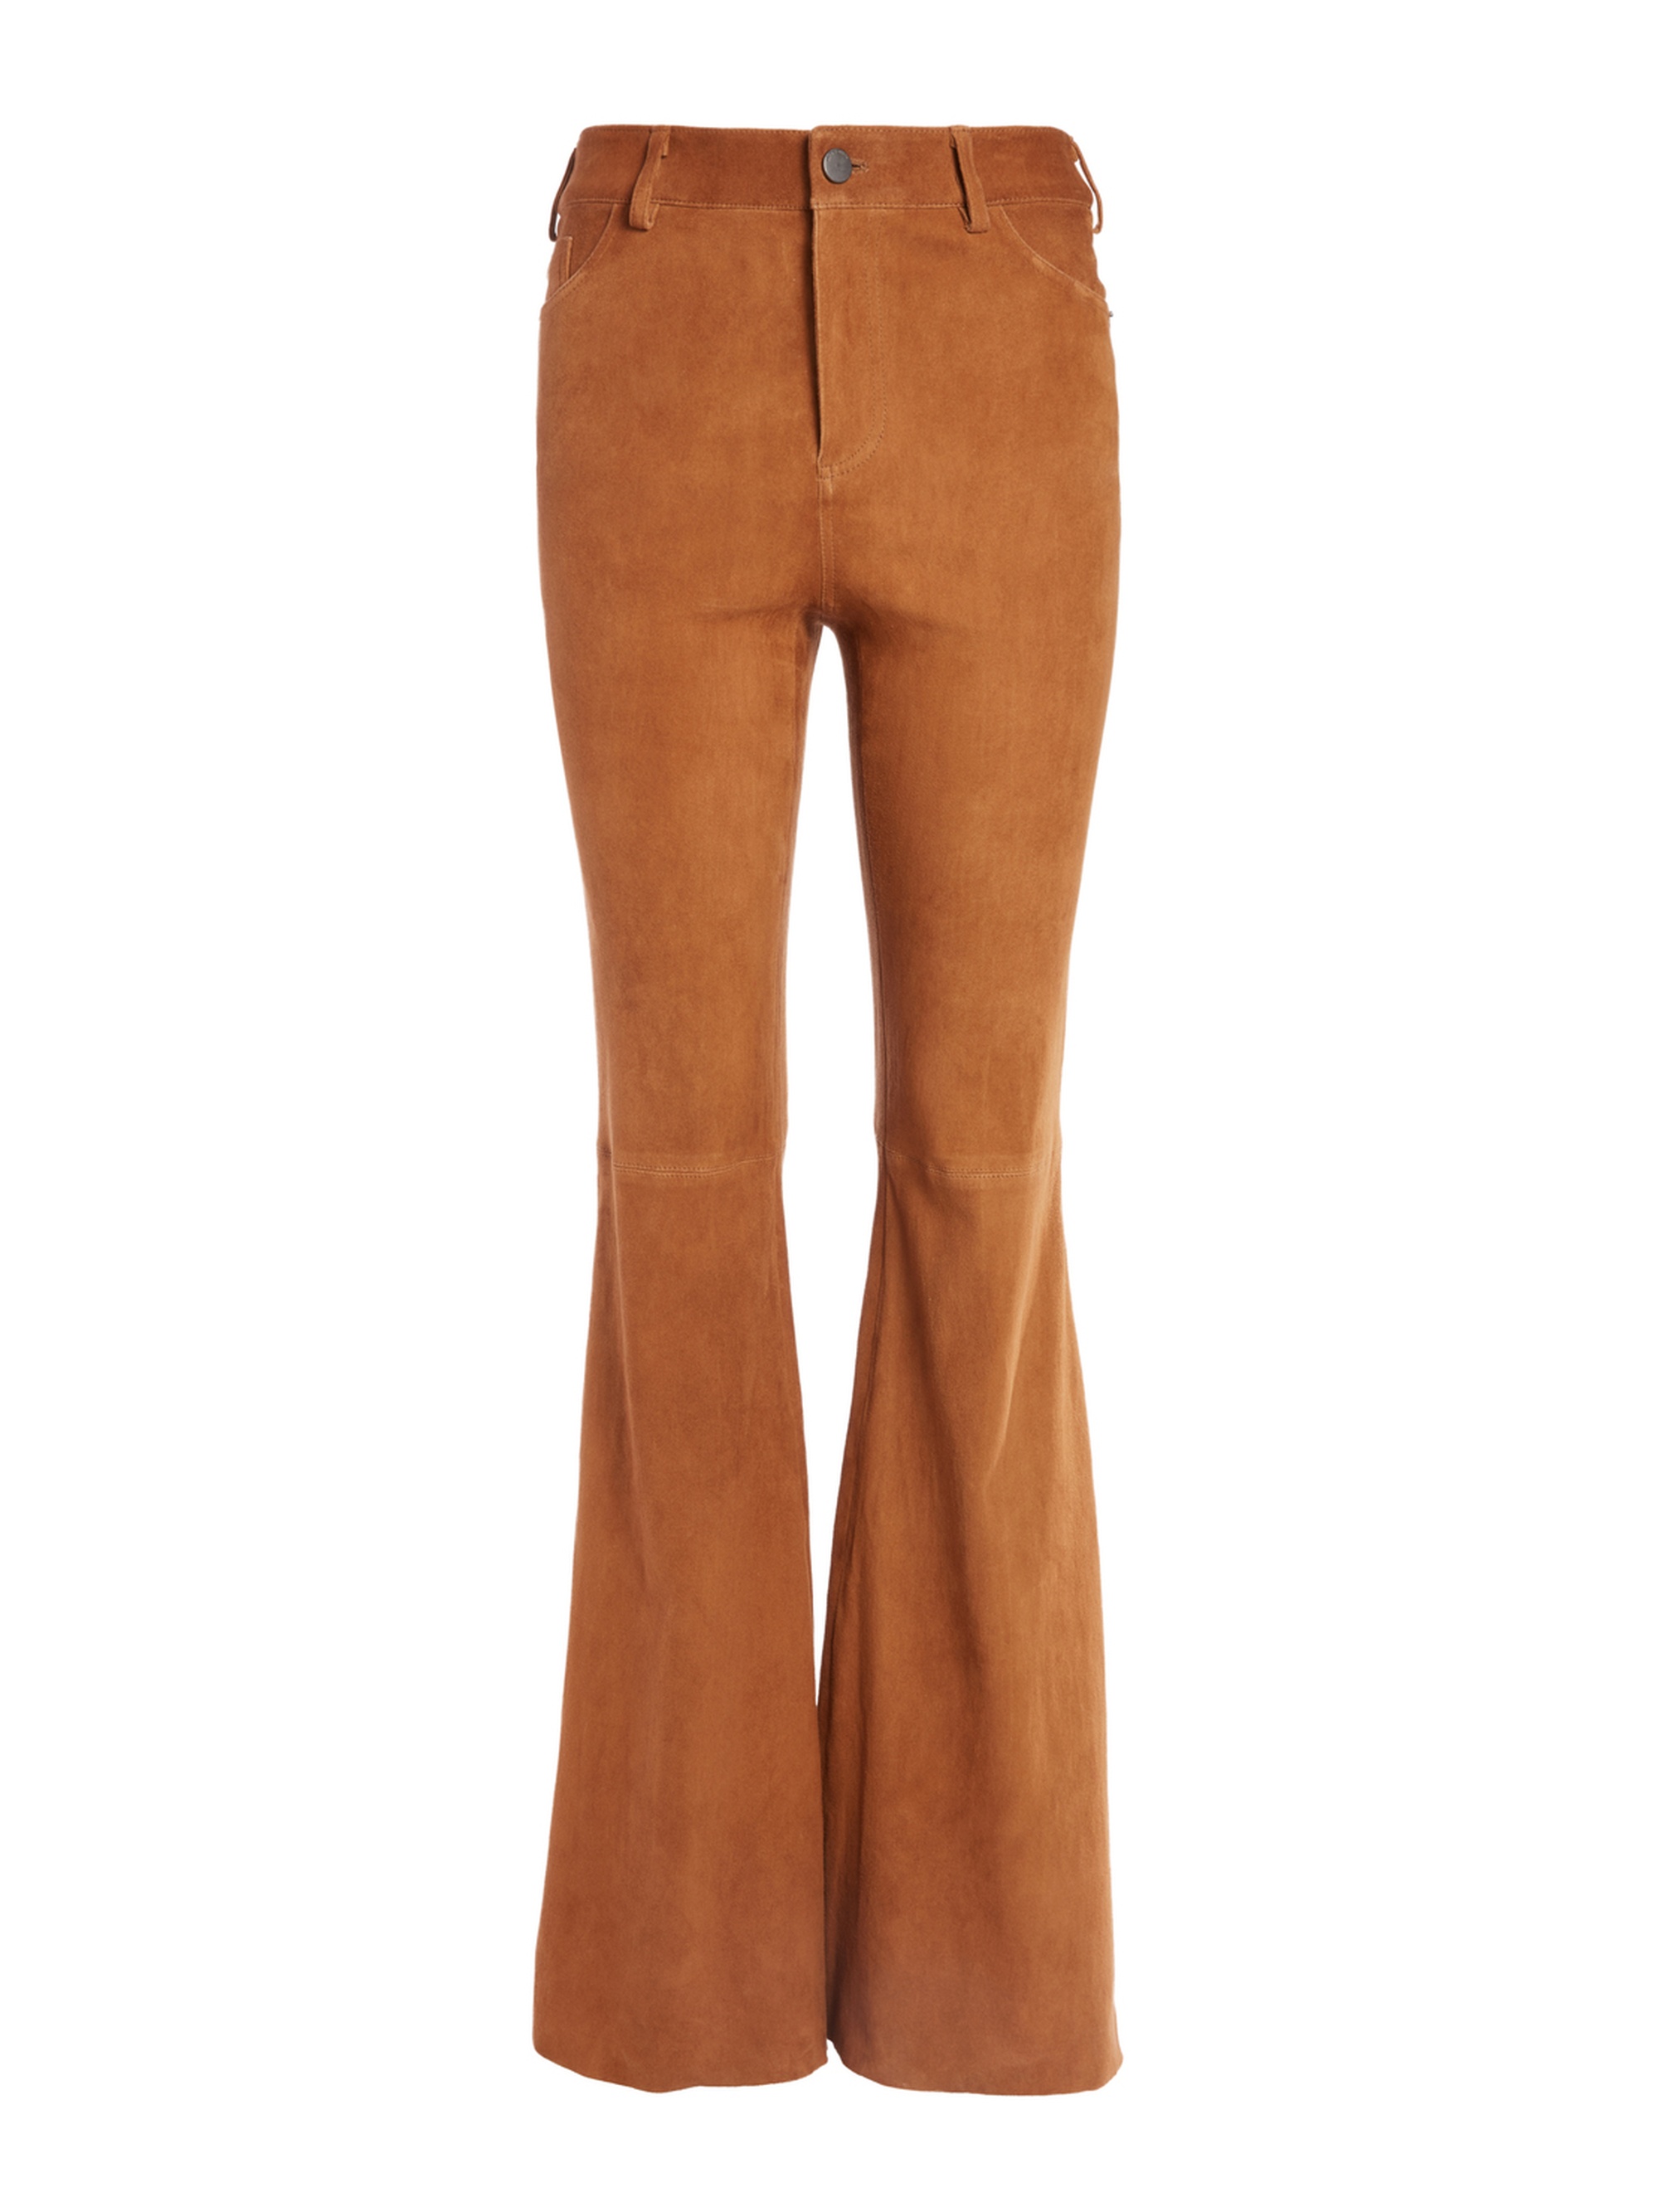 BRENT HIGH WAISTED SUEDE PANT - 2